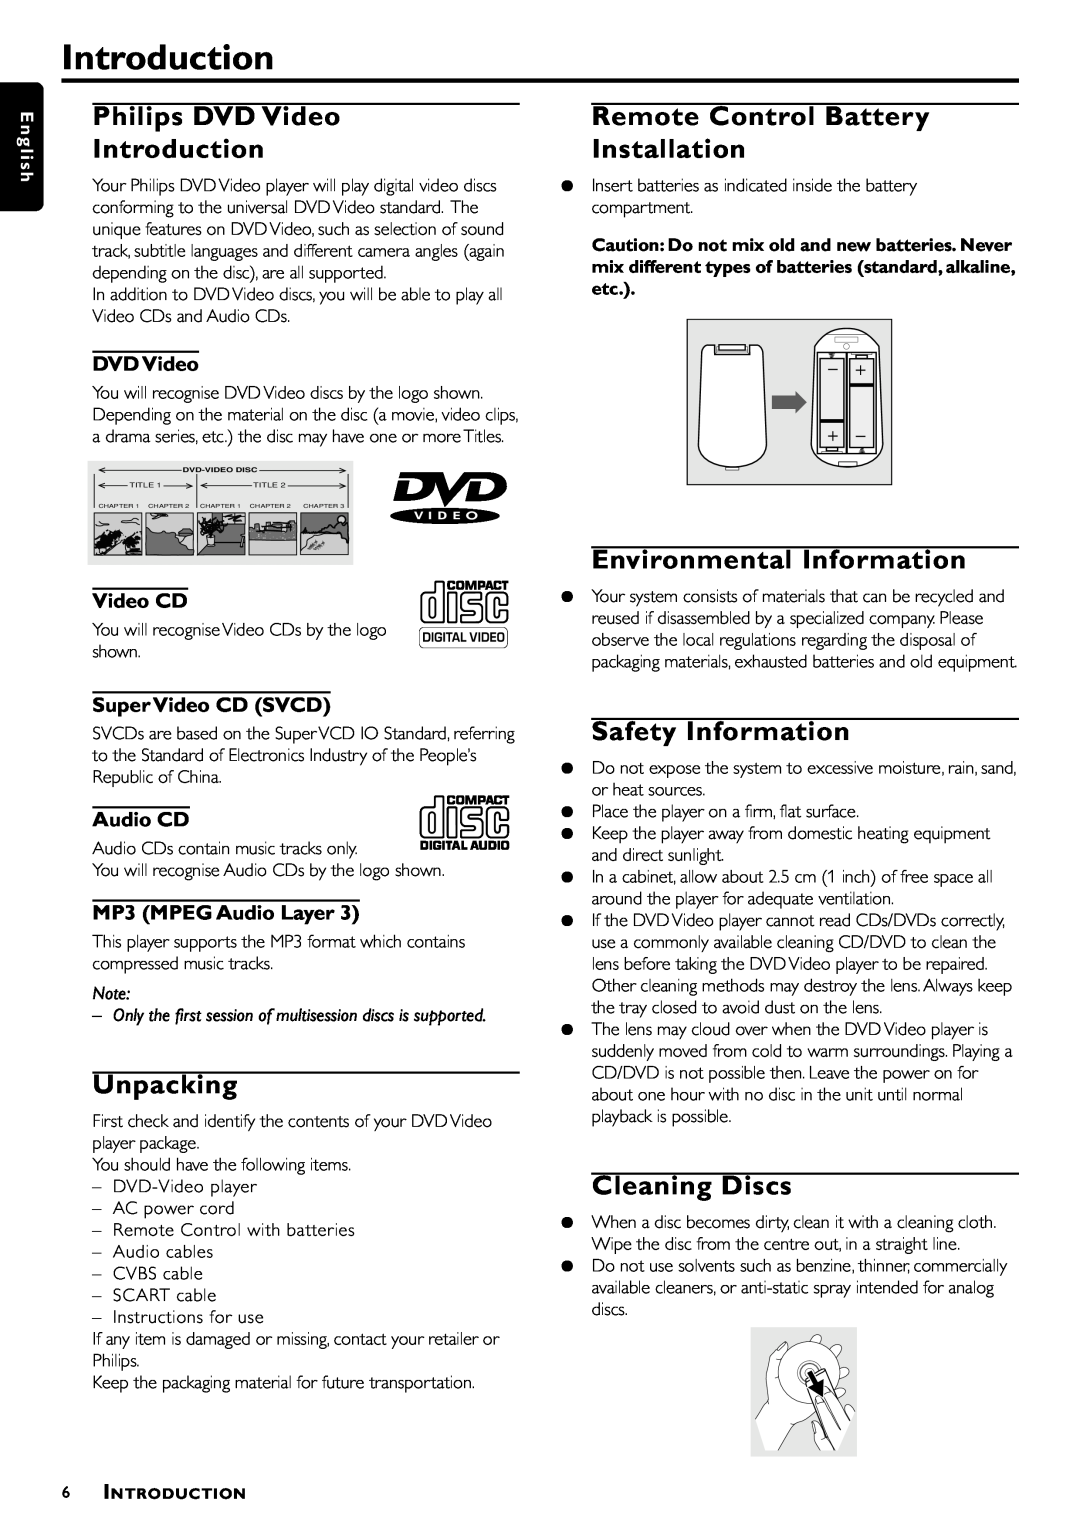 Philips DVD952/021 Philips DVD Video Introduction, Remote Control Battery Installation, Environmental Information 